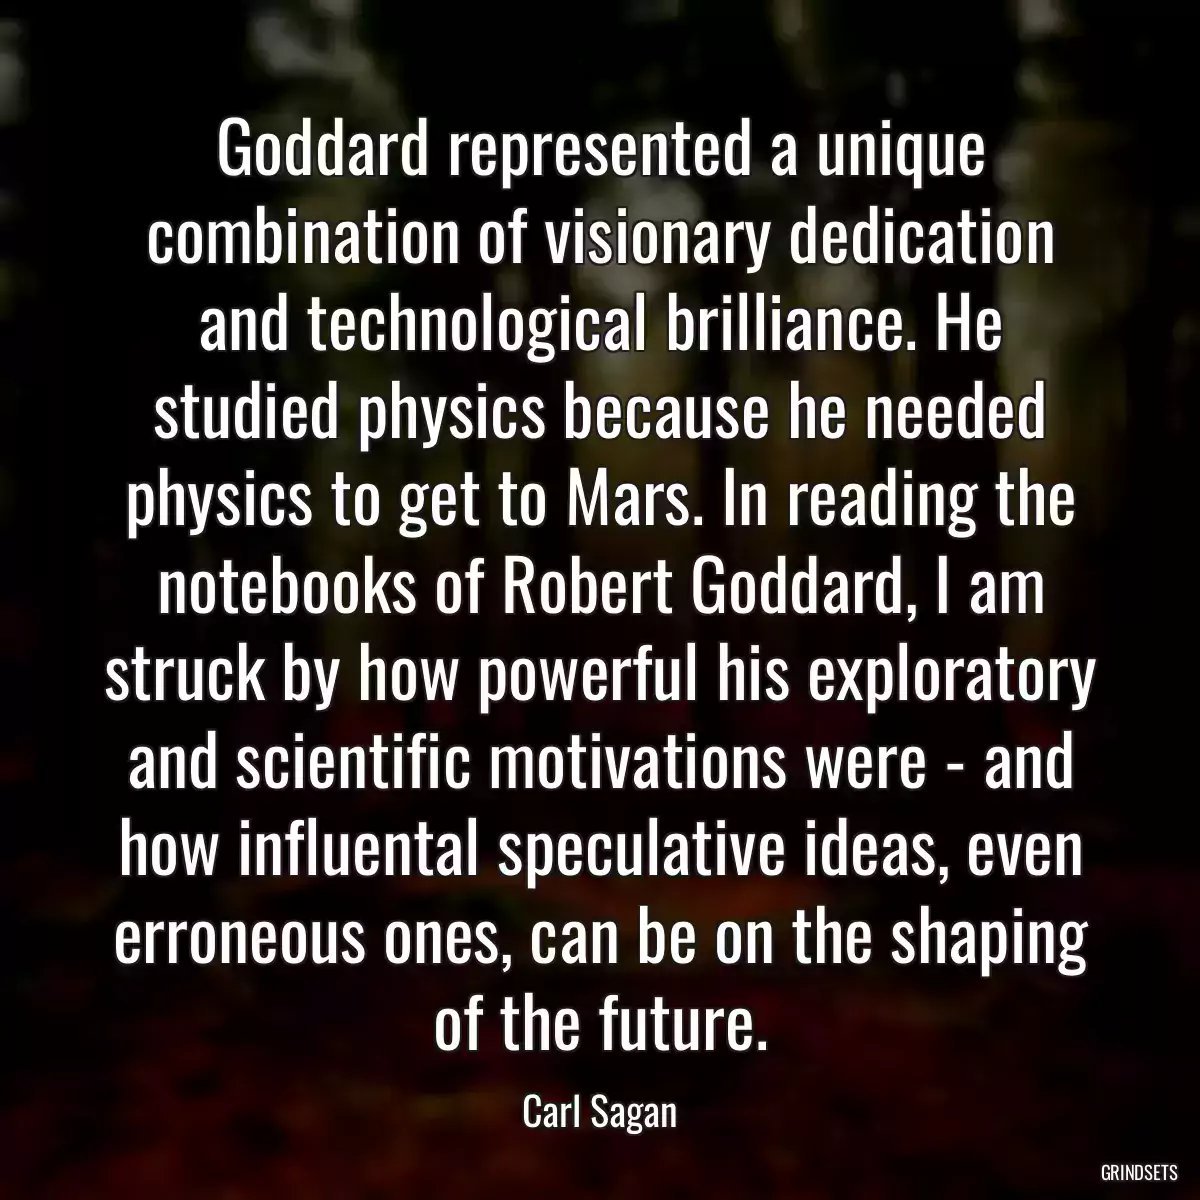 Goddard represented a unique combination of visionary dedication and technological brilliance. He studied physics because he needed physics to get to Mars. In reading the notebooks of Robert Goddard, I am struck by how powerful his exploratory and scientific motivations were - and how influental speculative ideas, even erroneous ones, can be on the shaping of the future.